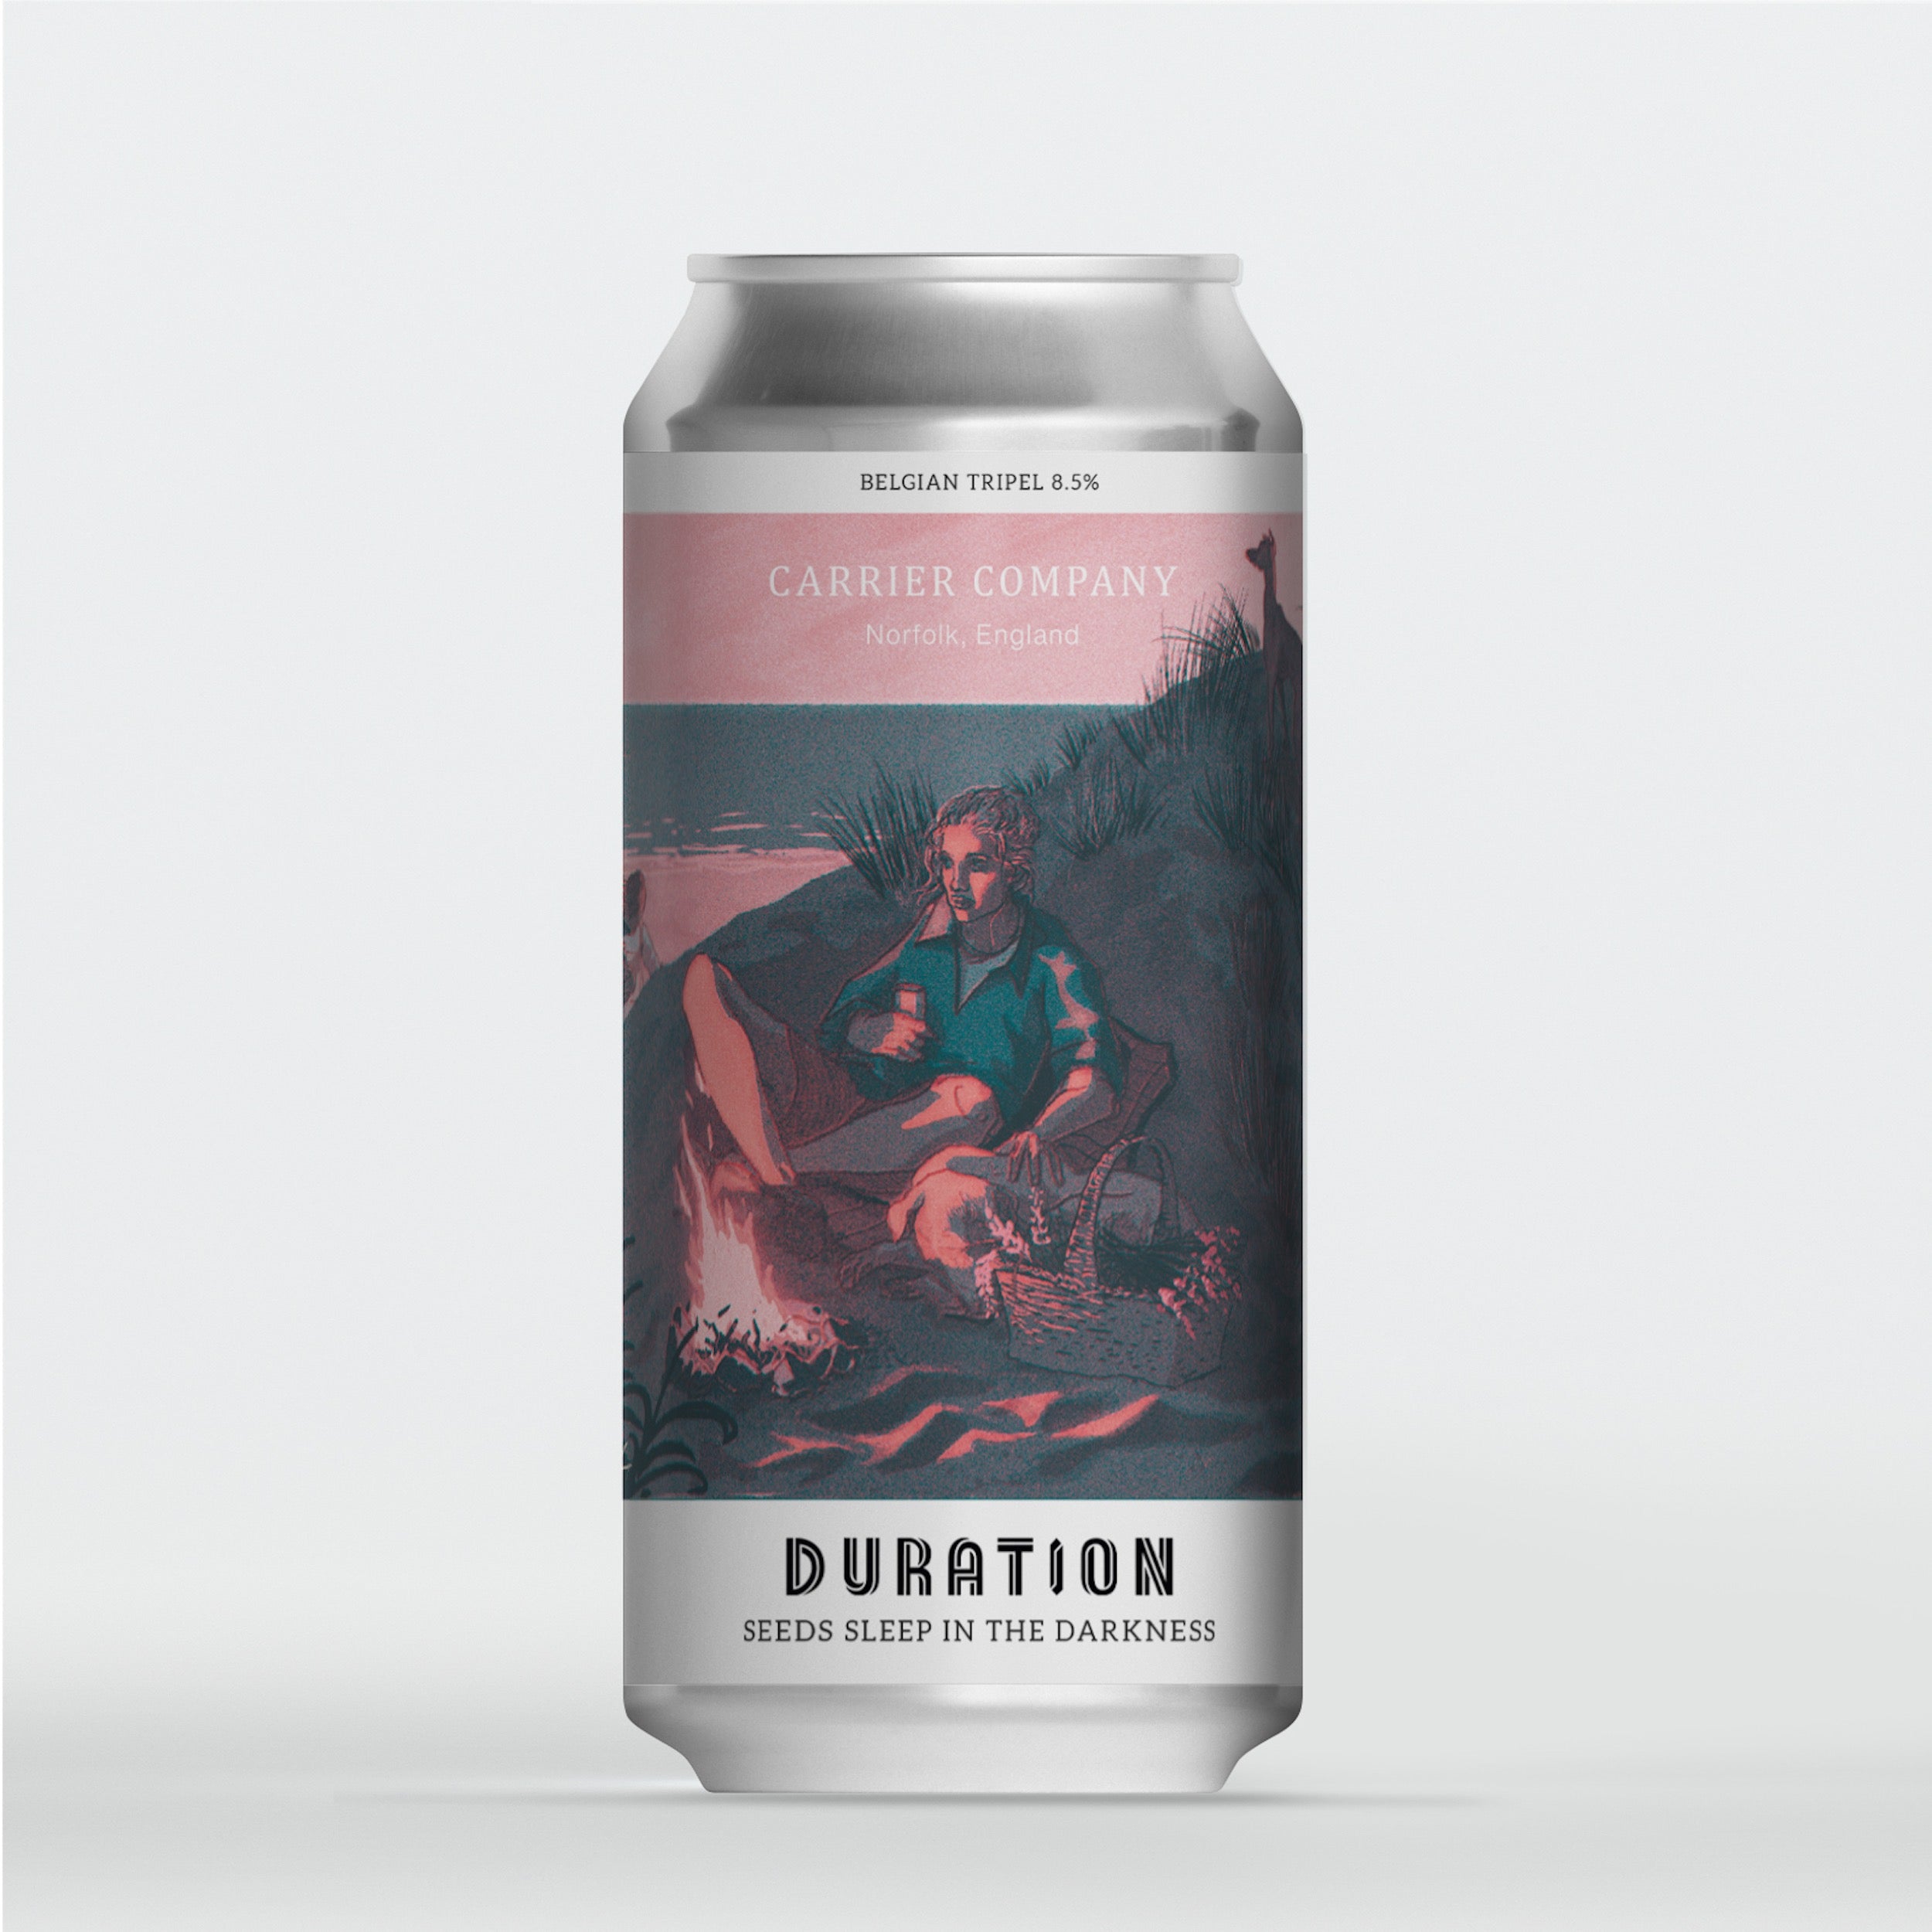 Carrier Company & Duration Brewery Seeds Sleep In The Darkness